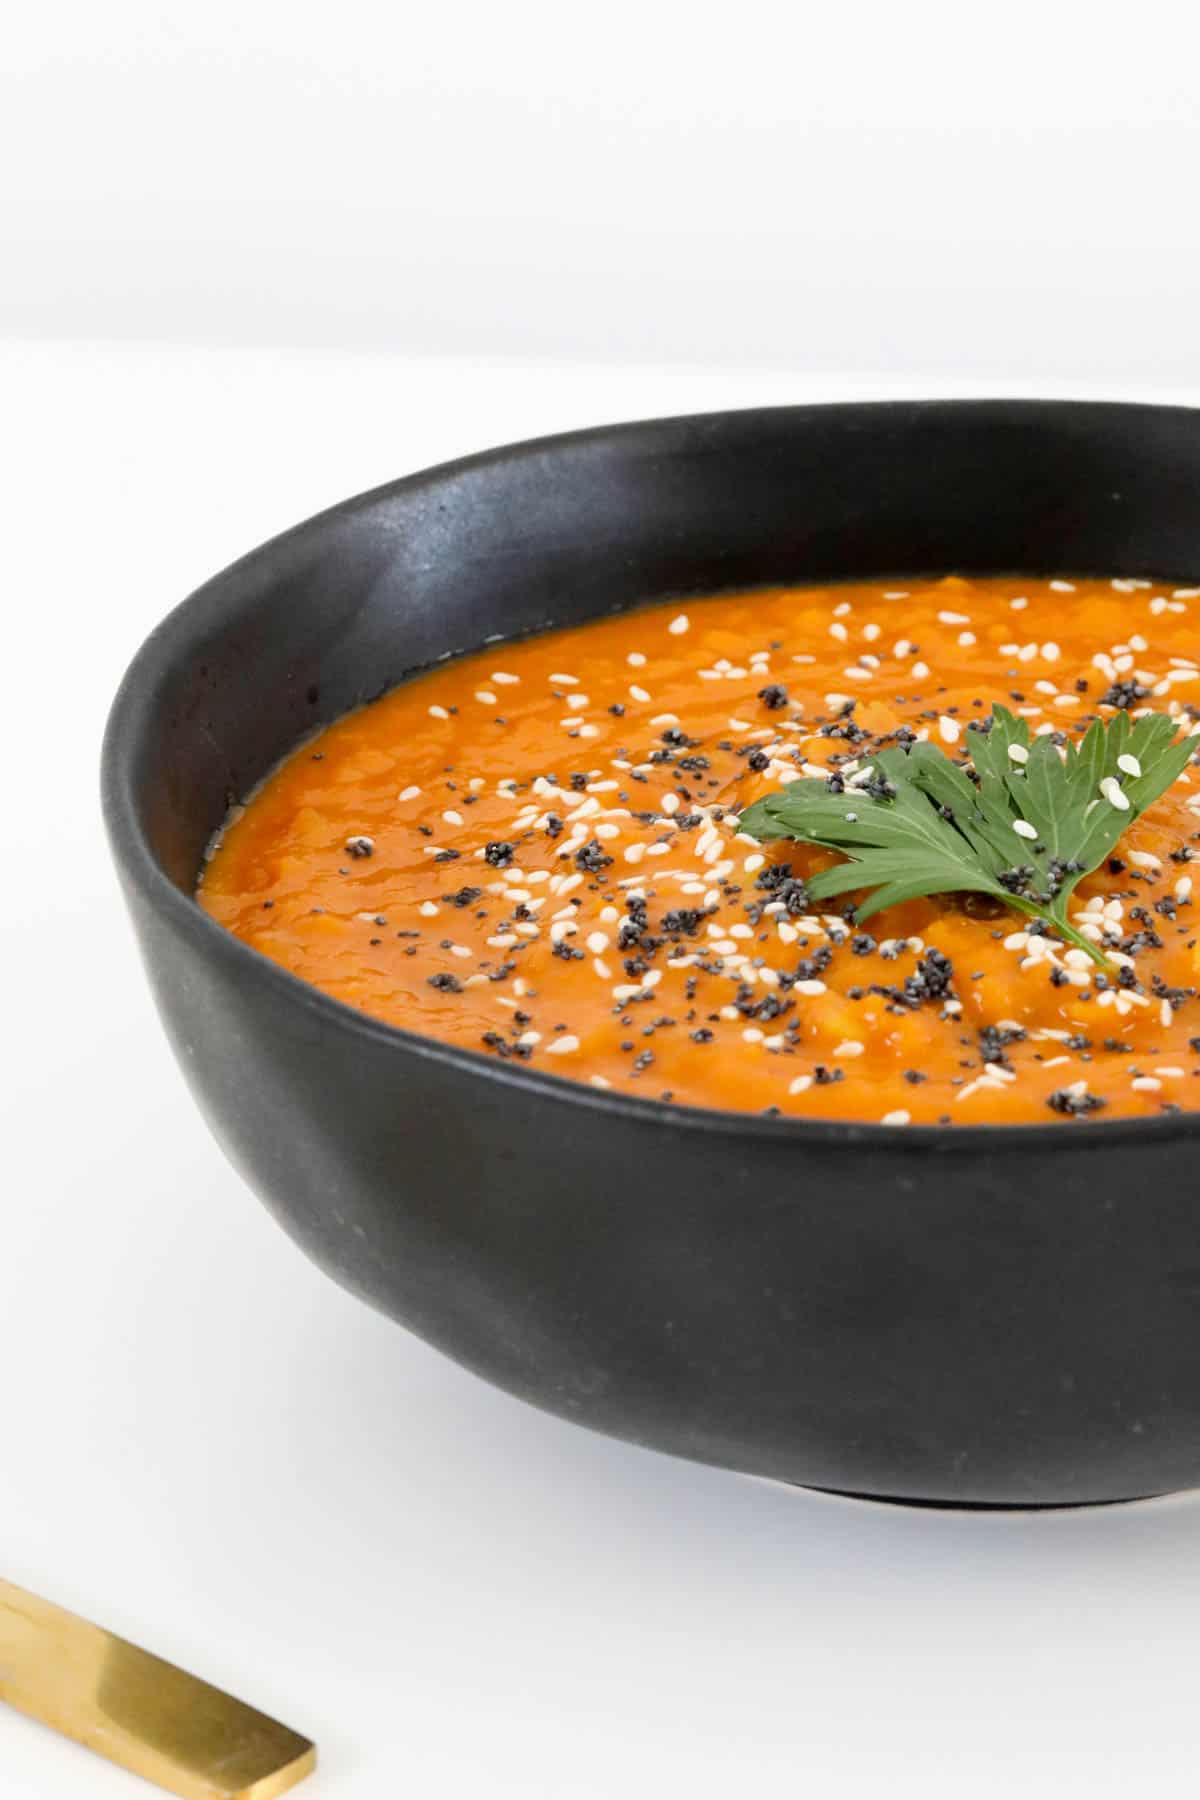 A bowl of carrot soup with herbs and seeds on top.